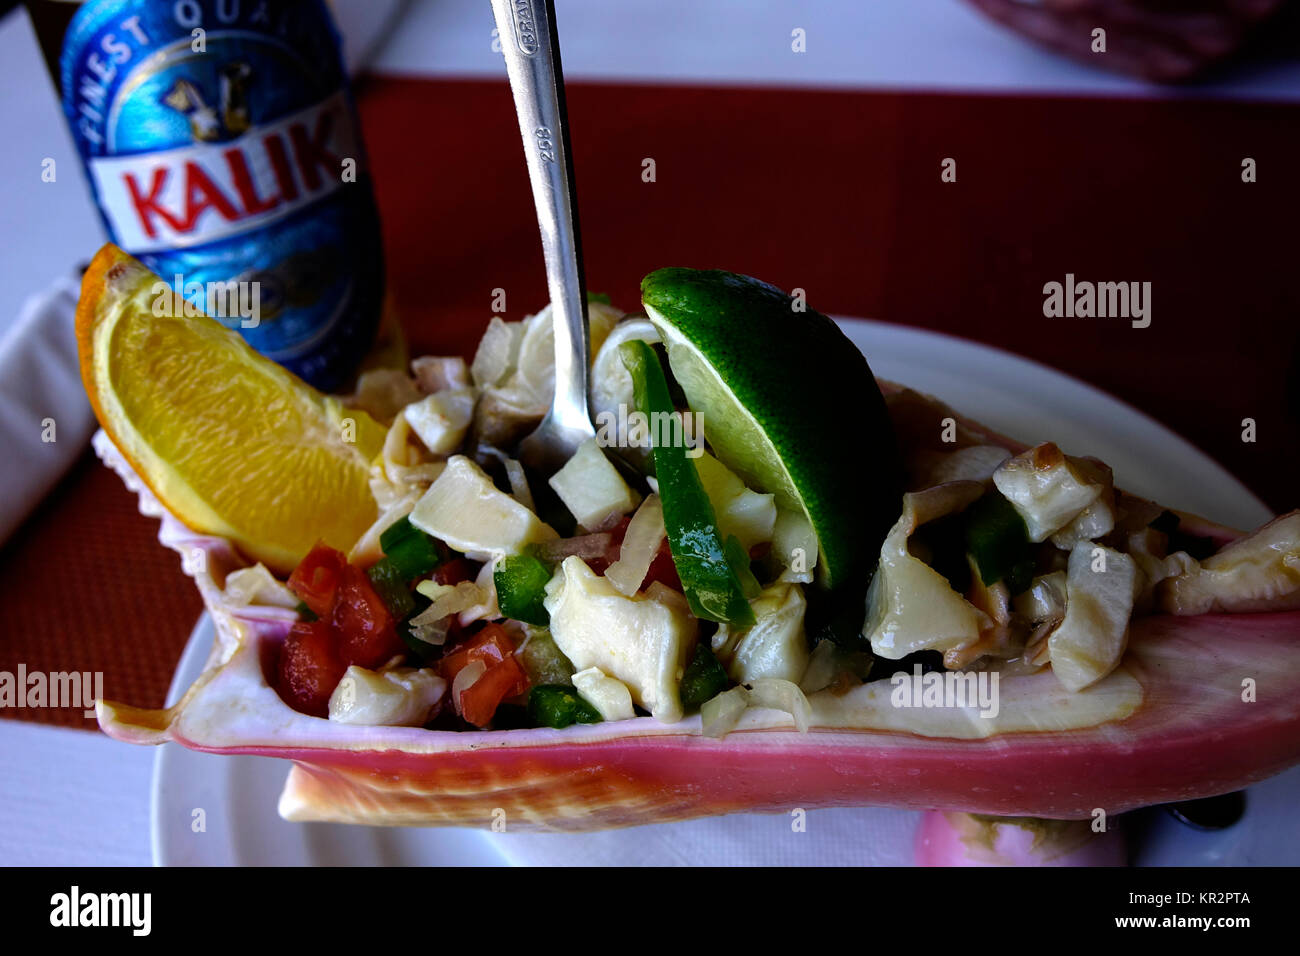 The Bahamas are famous for their fresh conch salads. Stock Photo